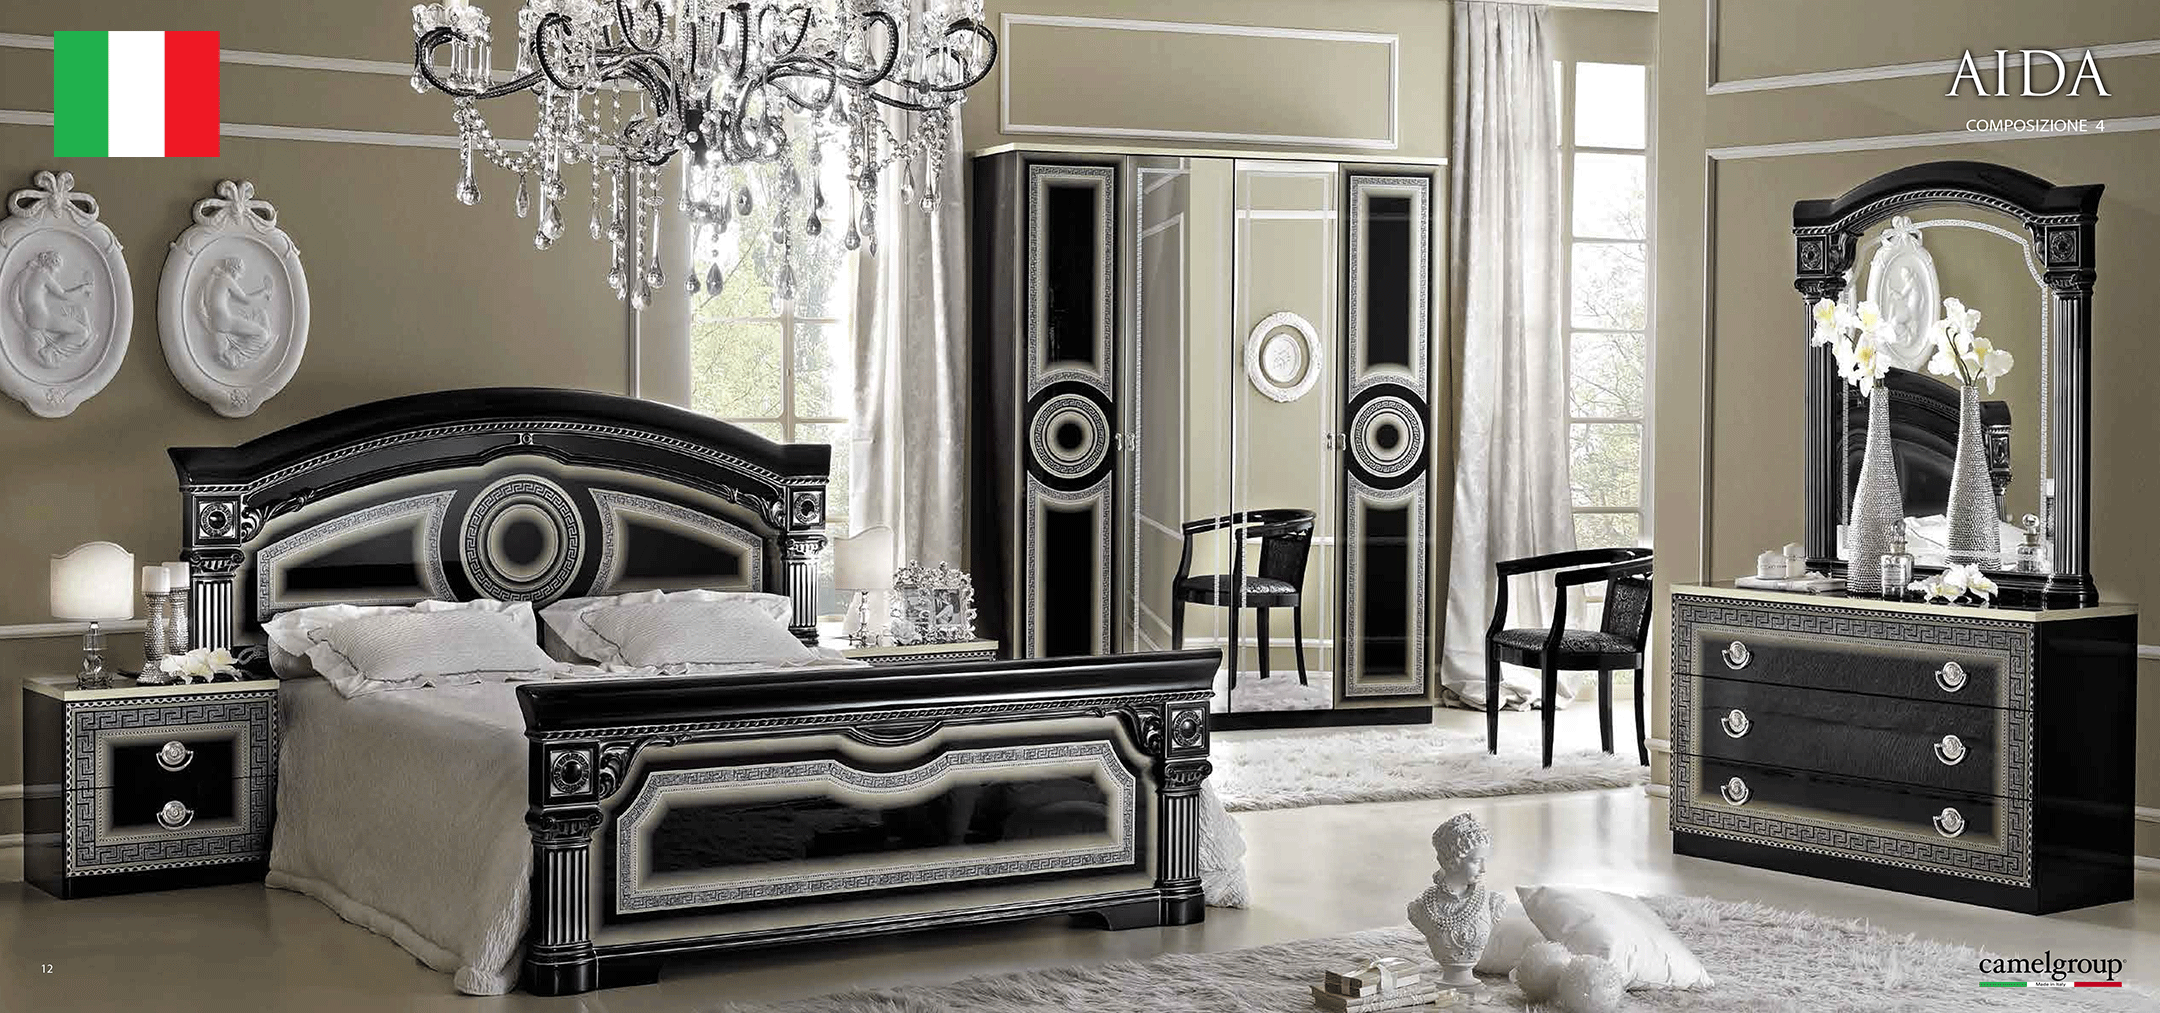 Bedroom Furniture Modern Bedrooms QS and KS Aida Bedroom Black/Silver, Camelgroup Italy